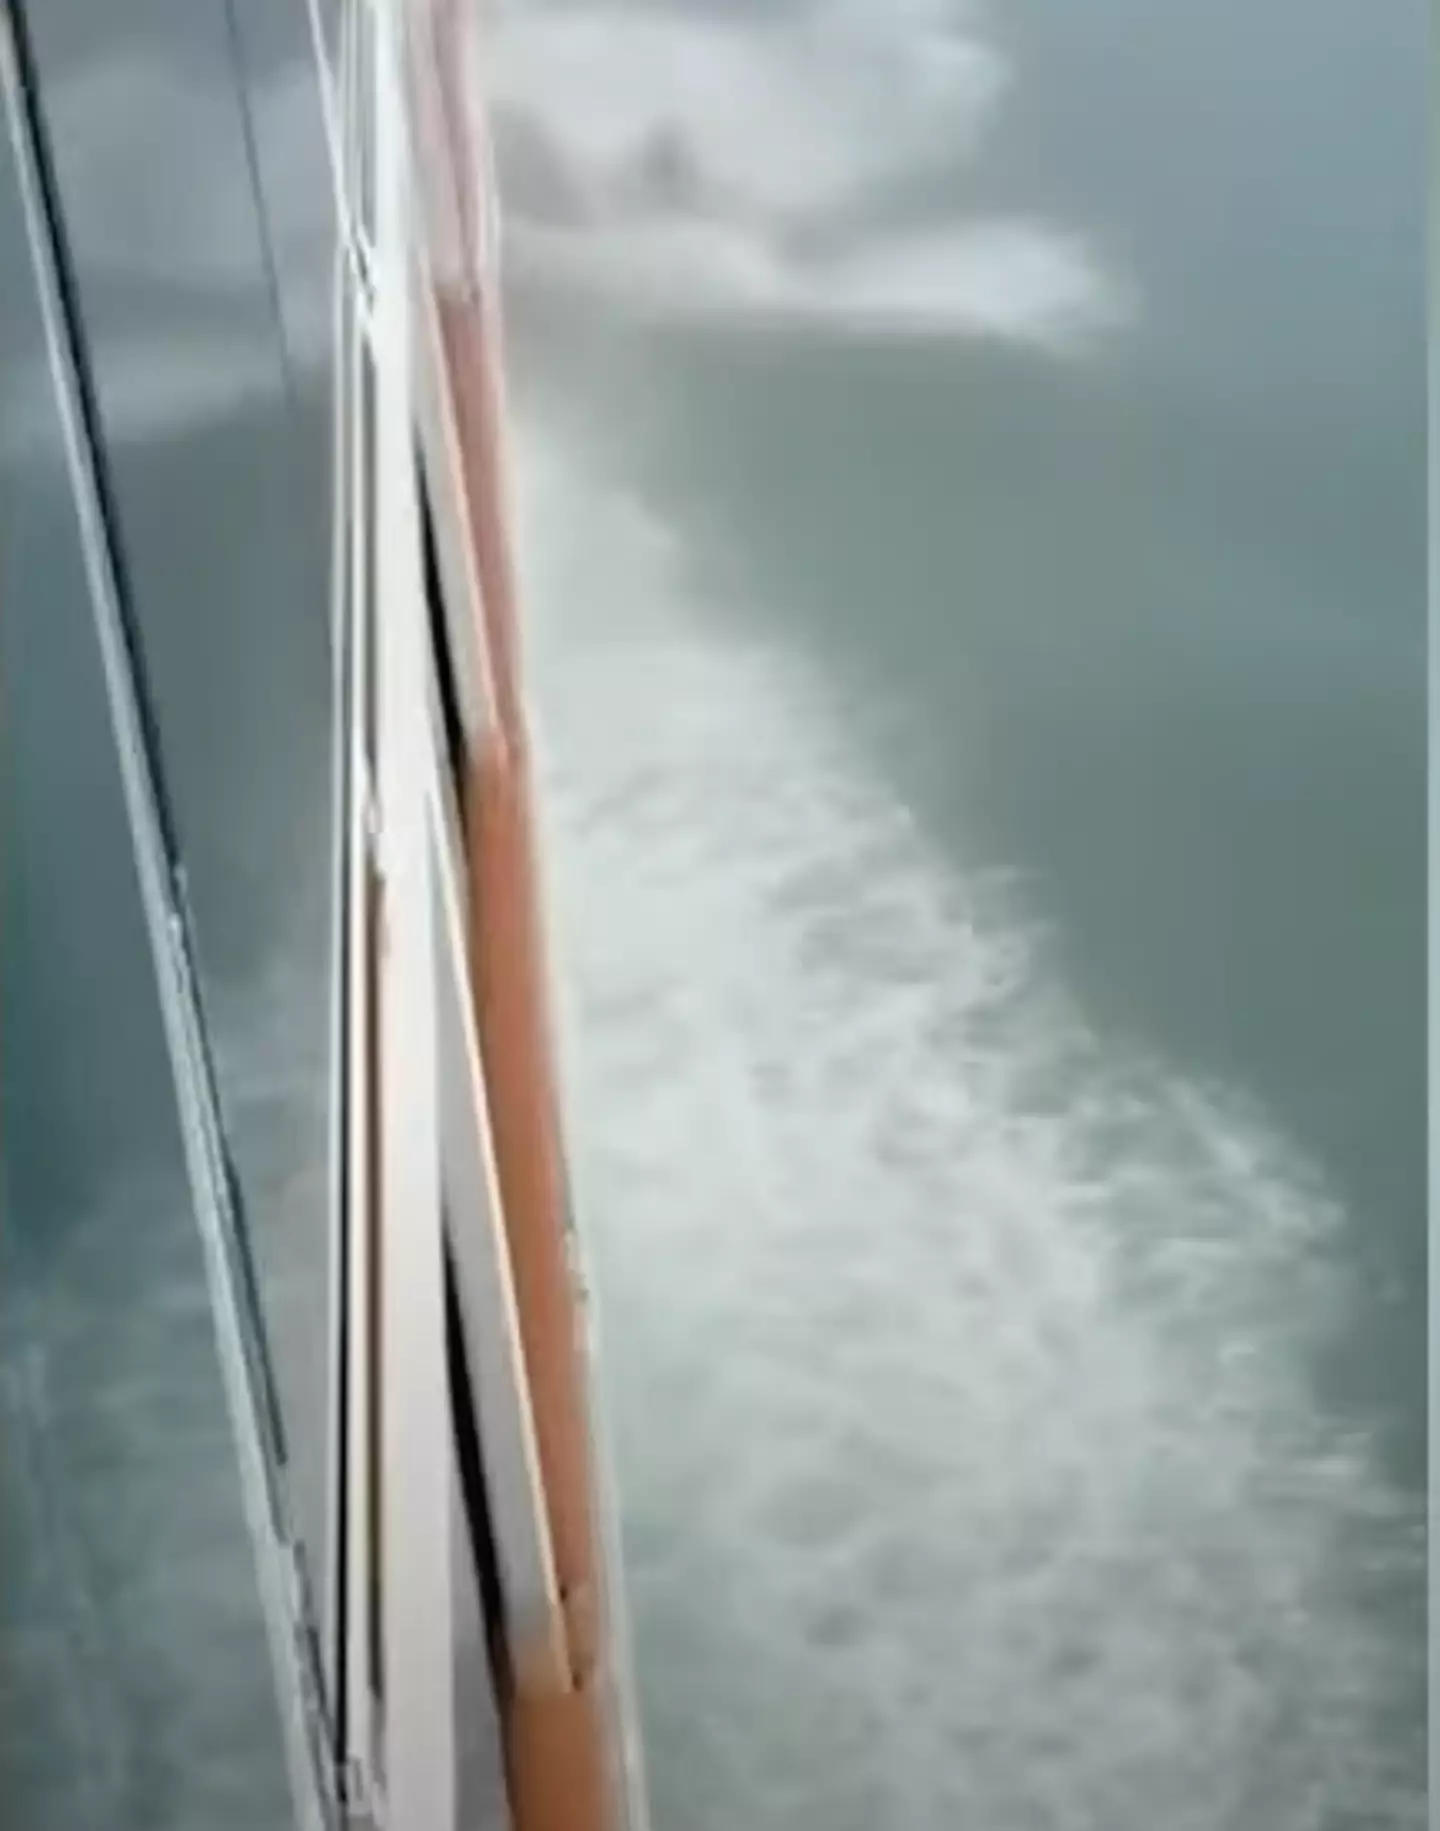 The side of the cruise ship hit the iceberg.